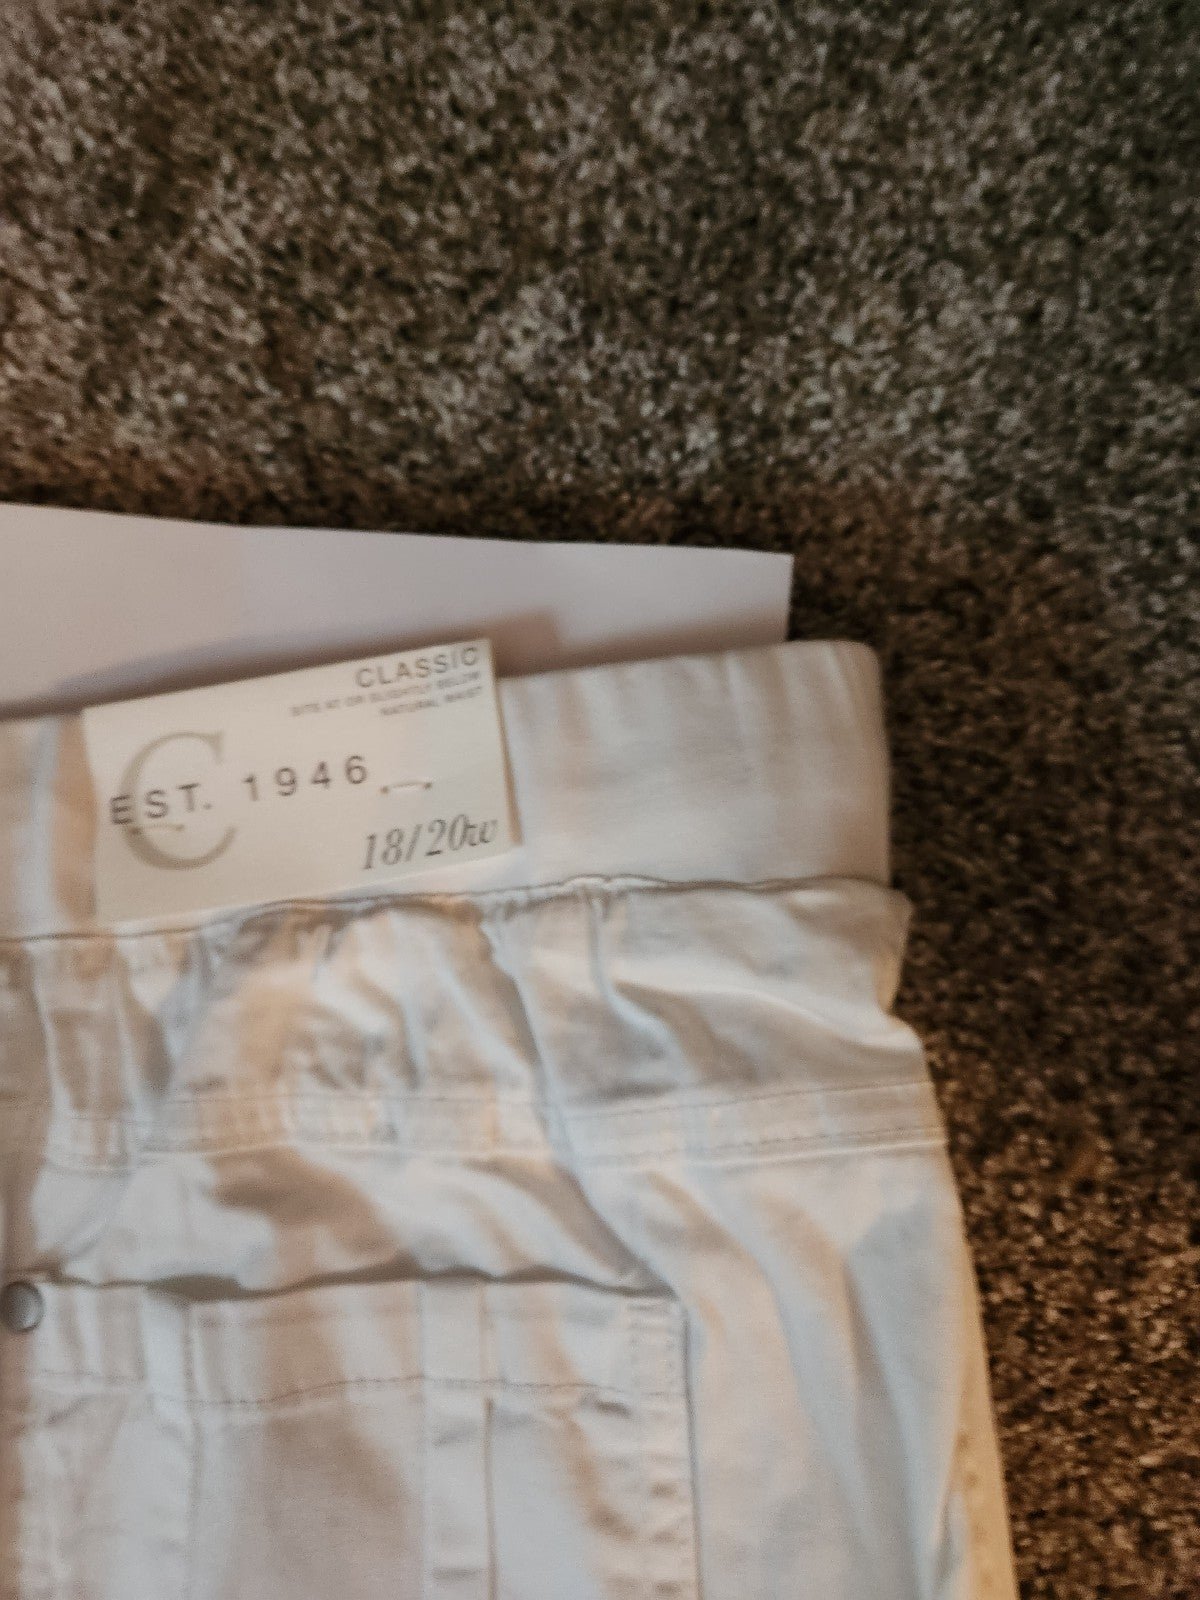 big discount Cato cropped utility pants size 18/20 ogyKrH5vi Low Price